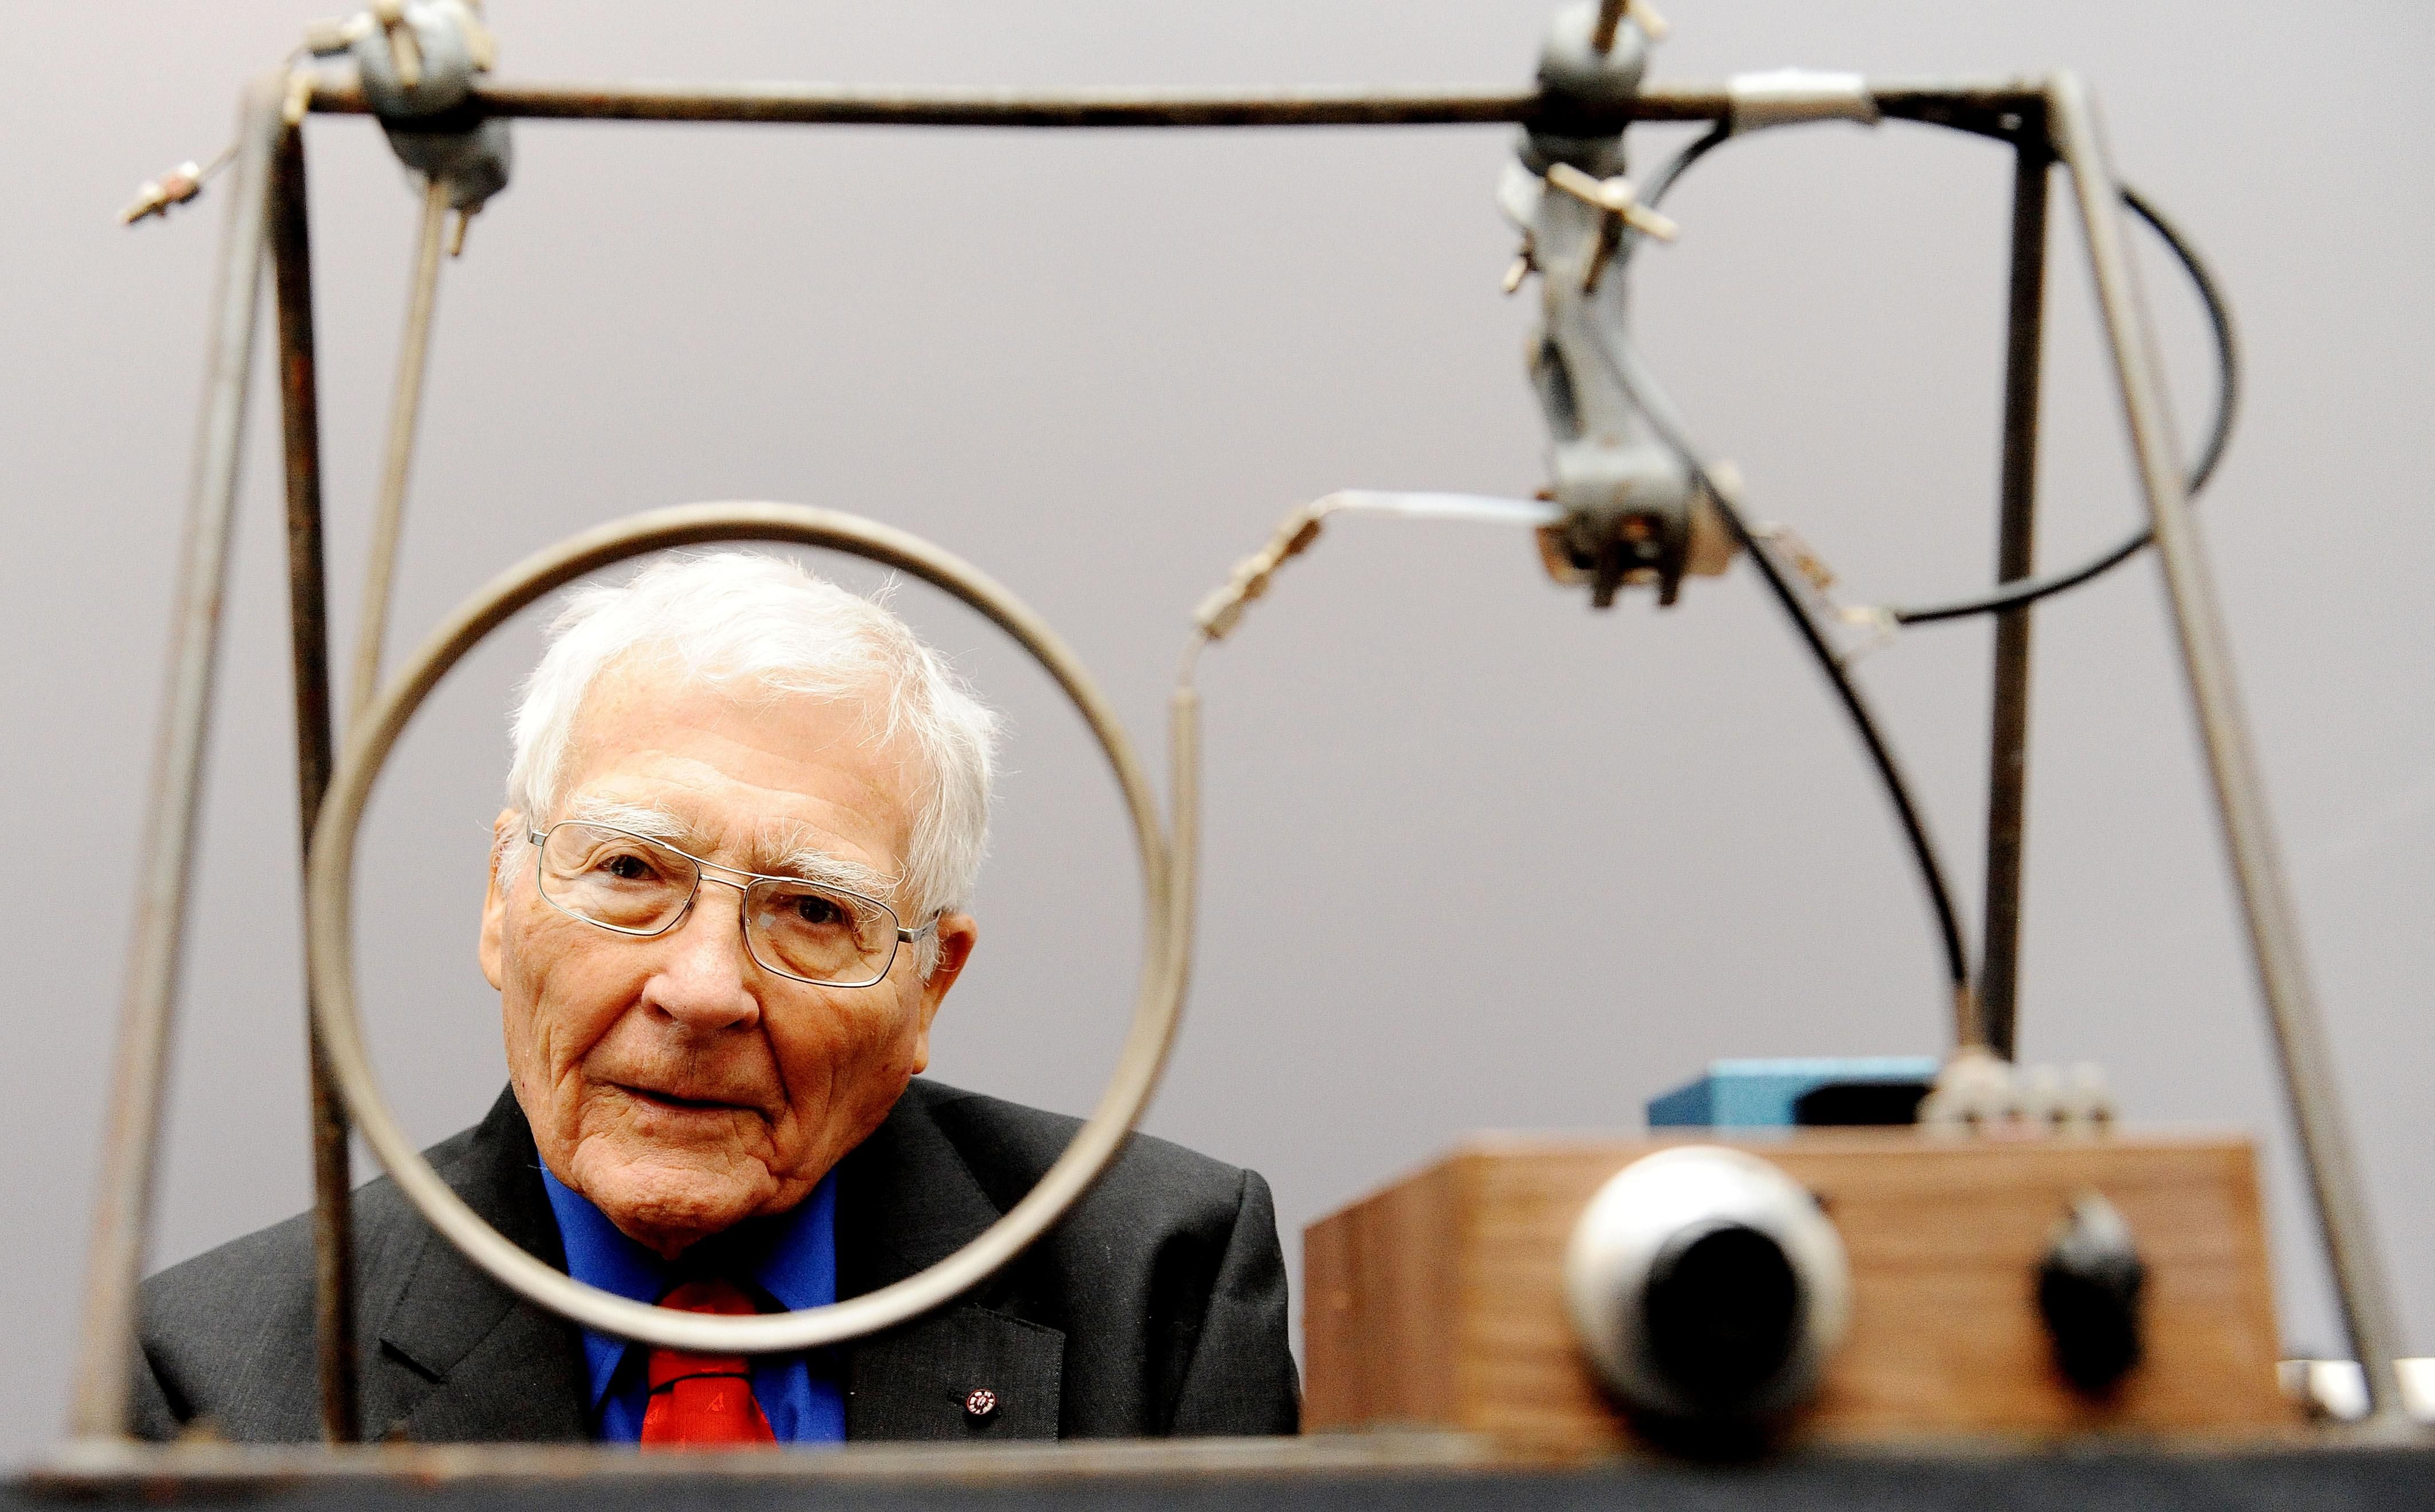 Scientist and inventor James Lovelock, 94, sits with one of his early inventions, a homemade Gas Chromatography device, used for measuring gas and molecules present in the atmosphere, during a photocall for the Unlocking Lovelock: Scientist, Inventor, Maverick exhibition at the Science Museum, south west London. (Photo by Nick Ansell/PA Images via Getty Images)